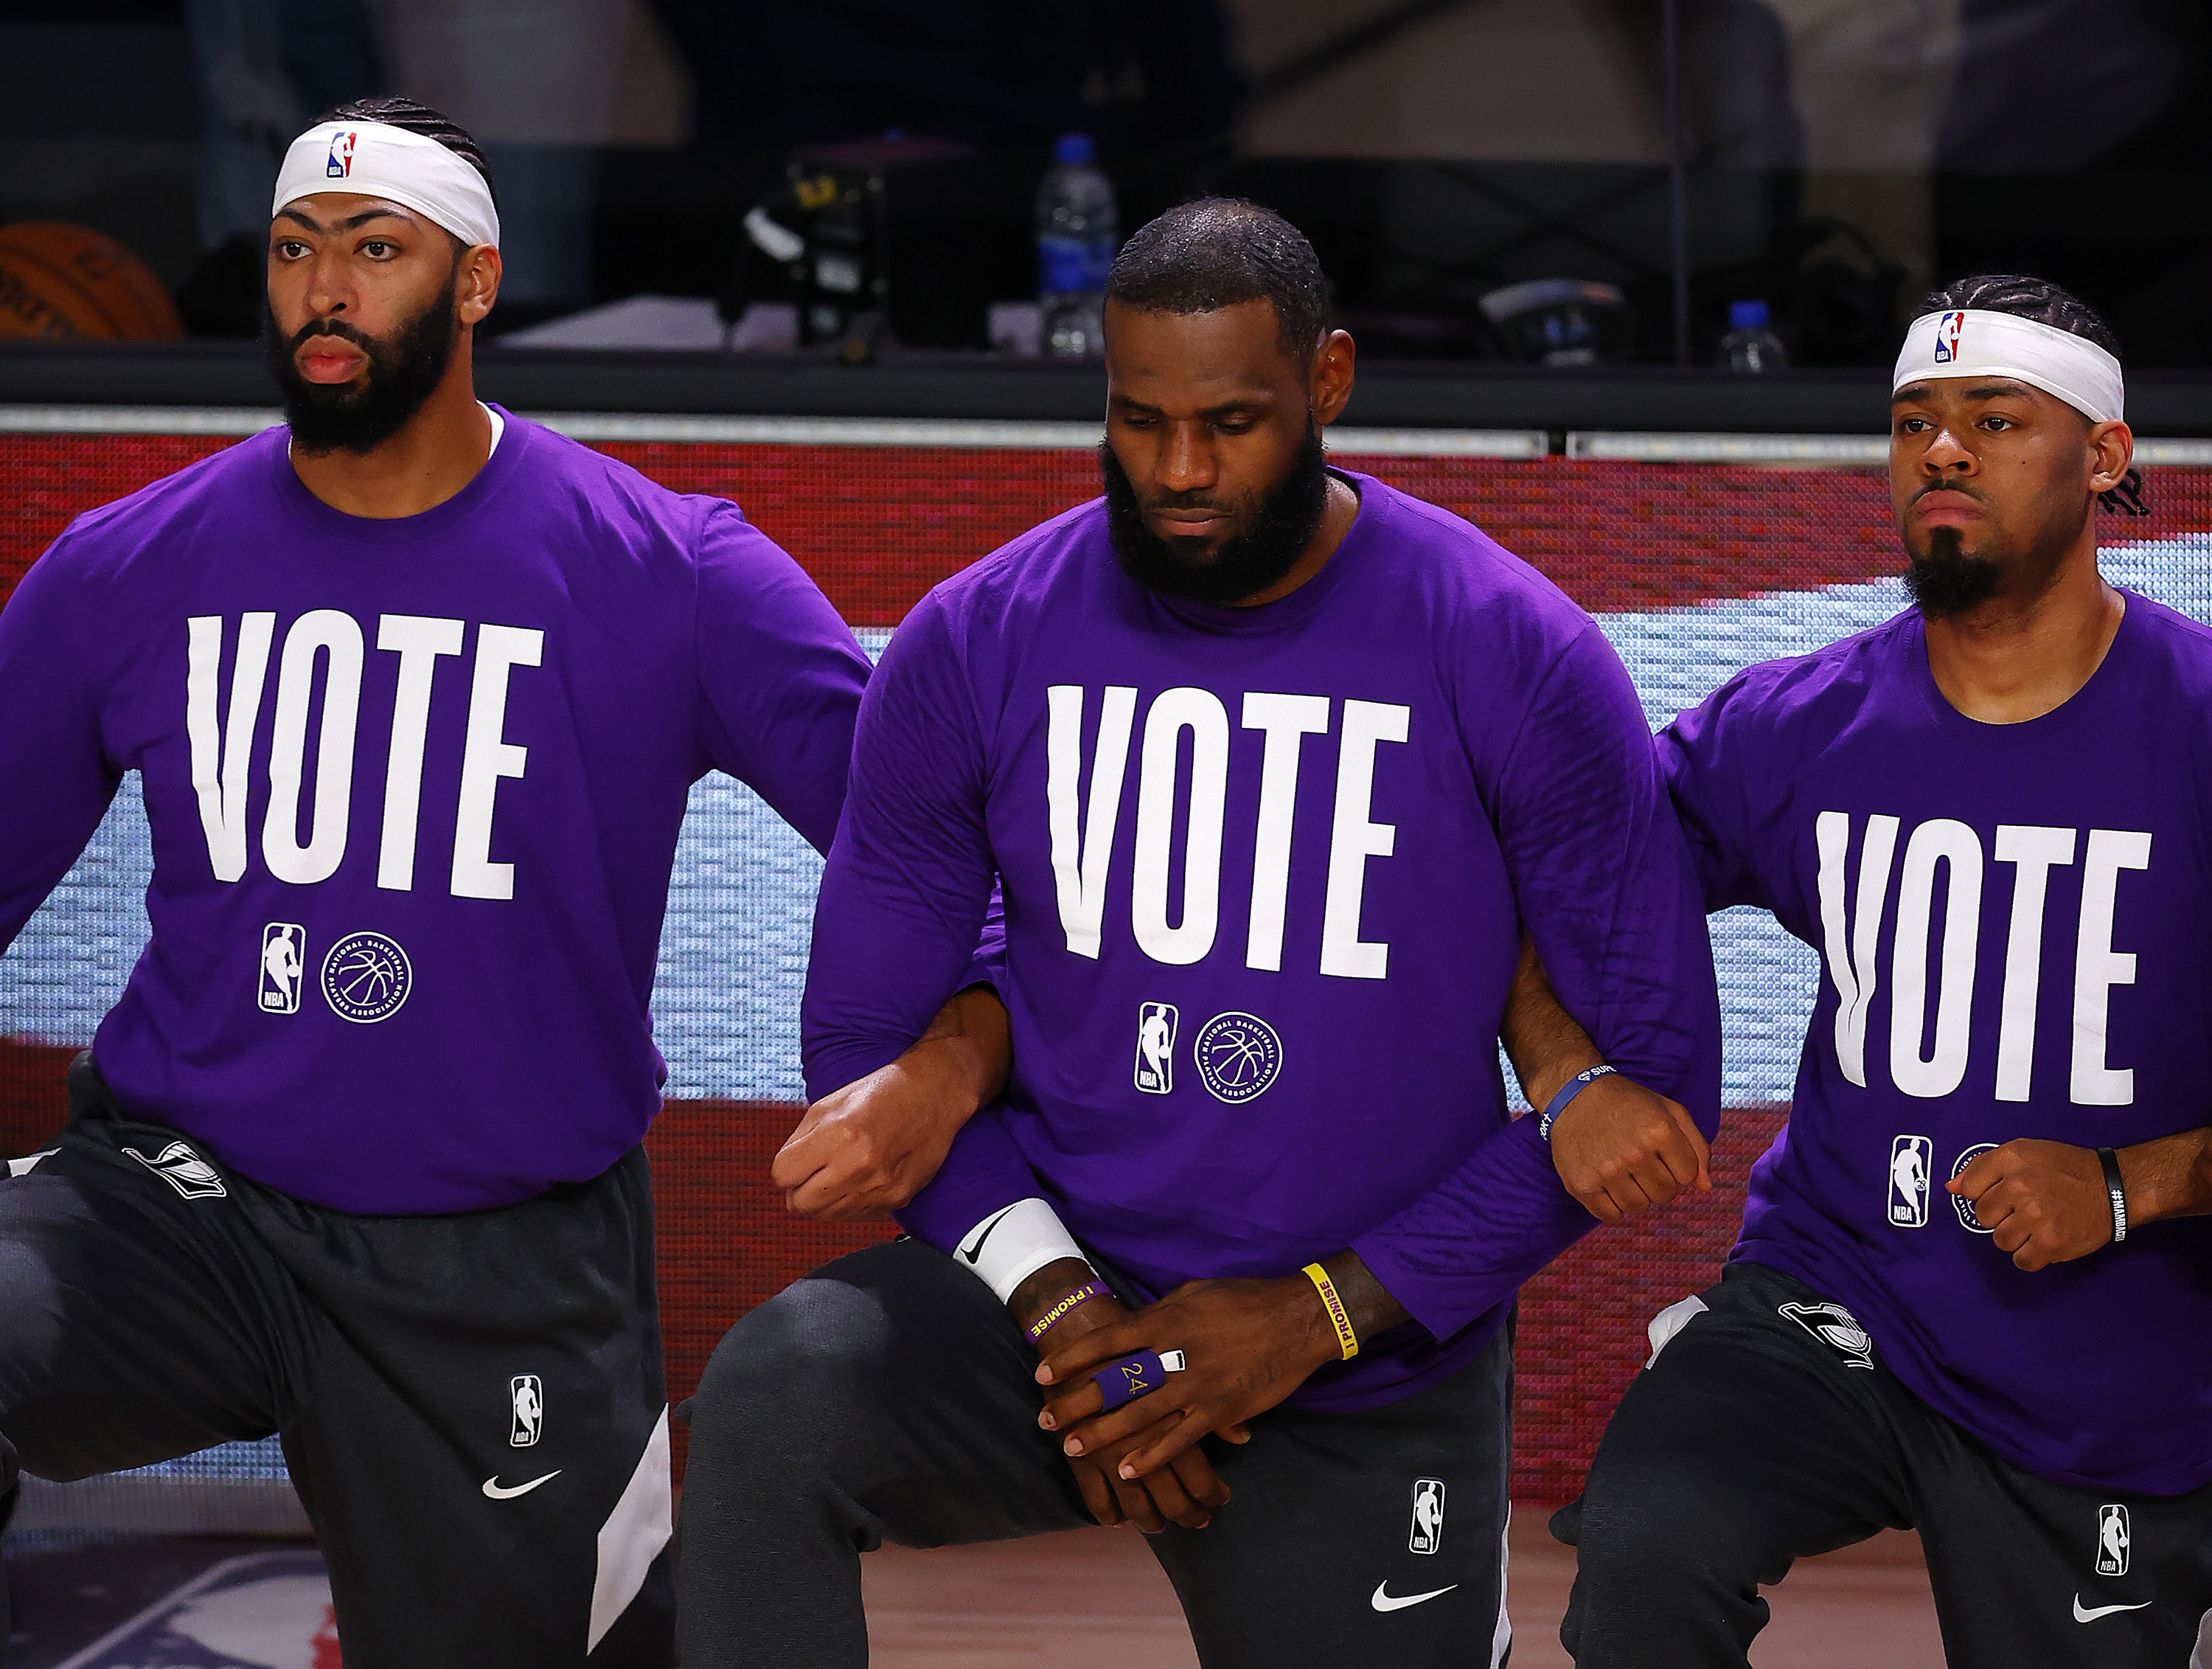 LeBron James elected vice president of NBA player's union